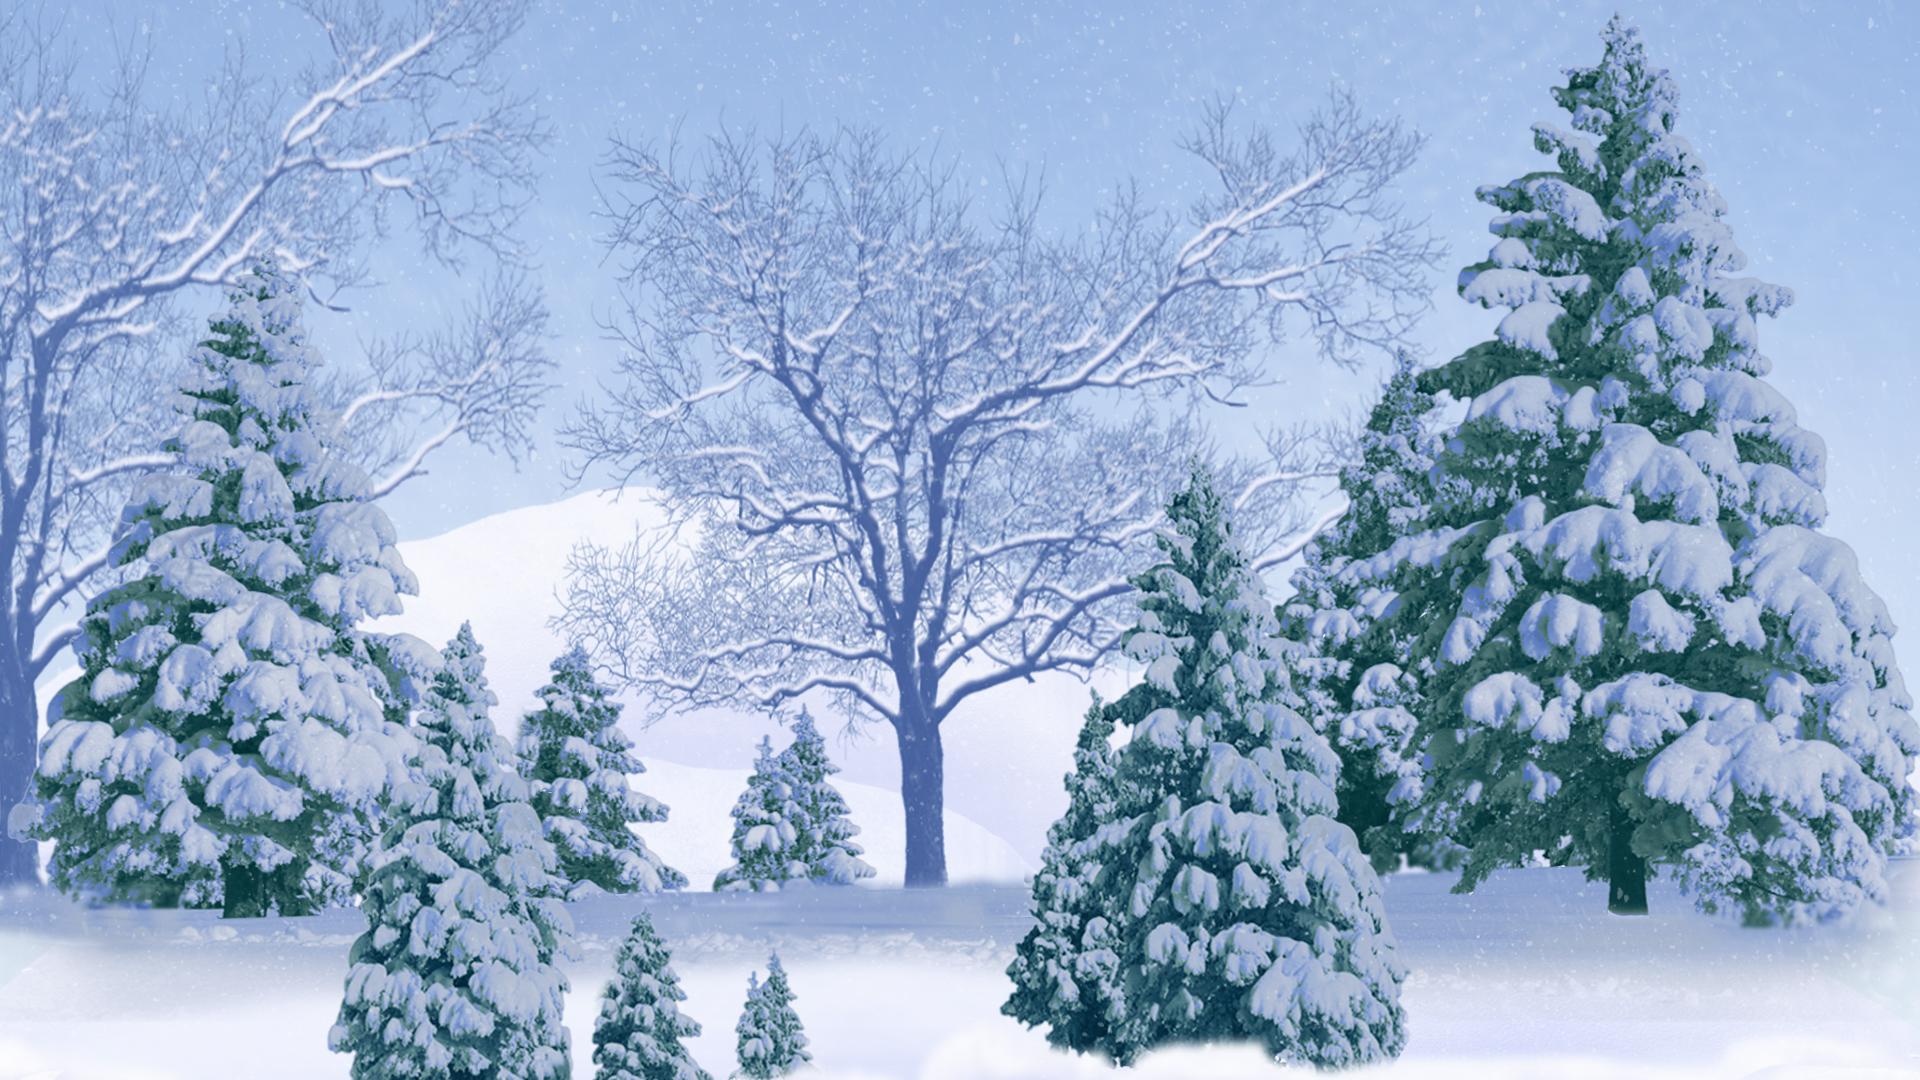 Background Winter White Background Trees Snow Image Full HD